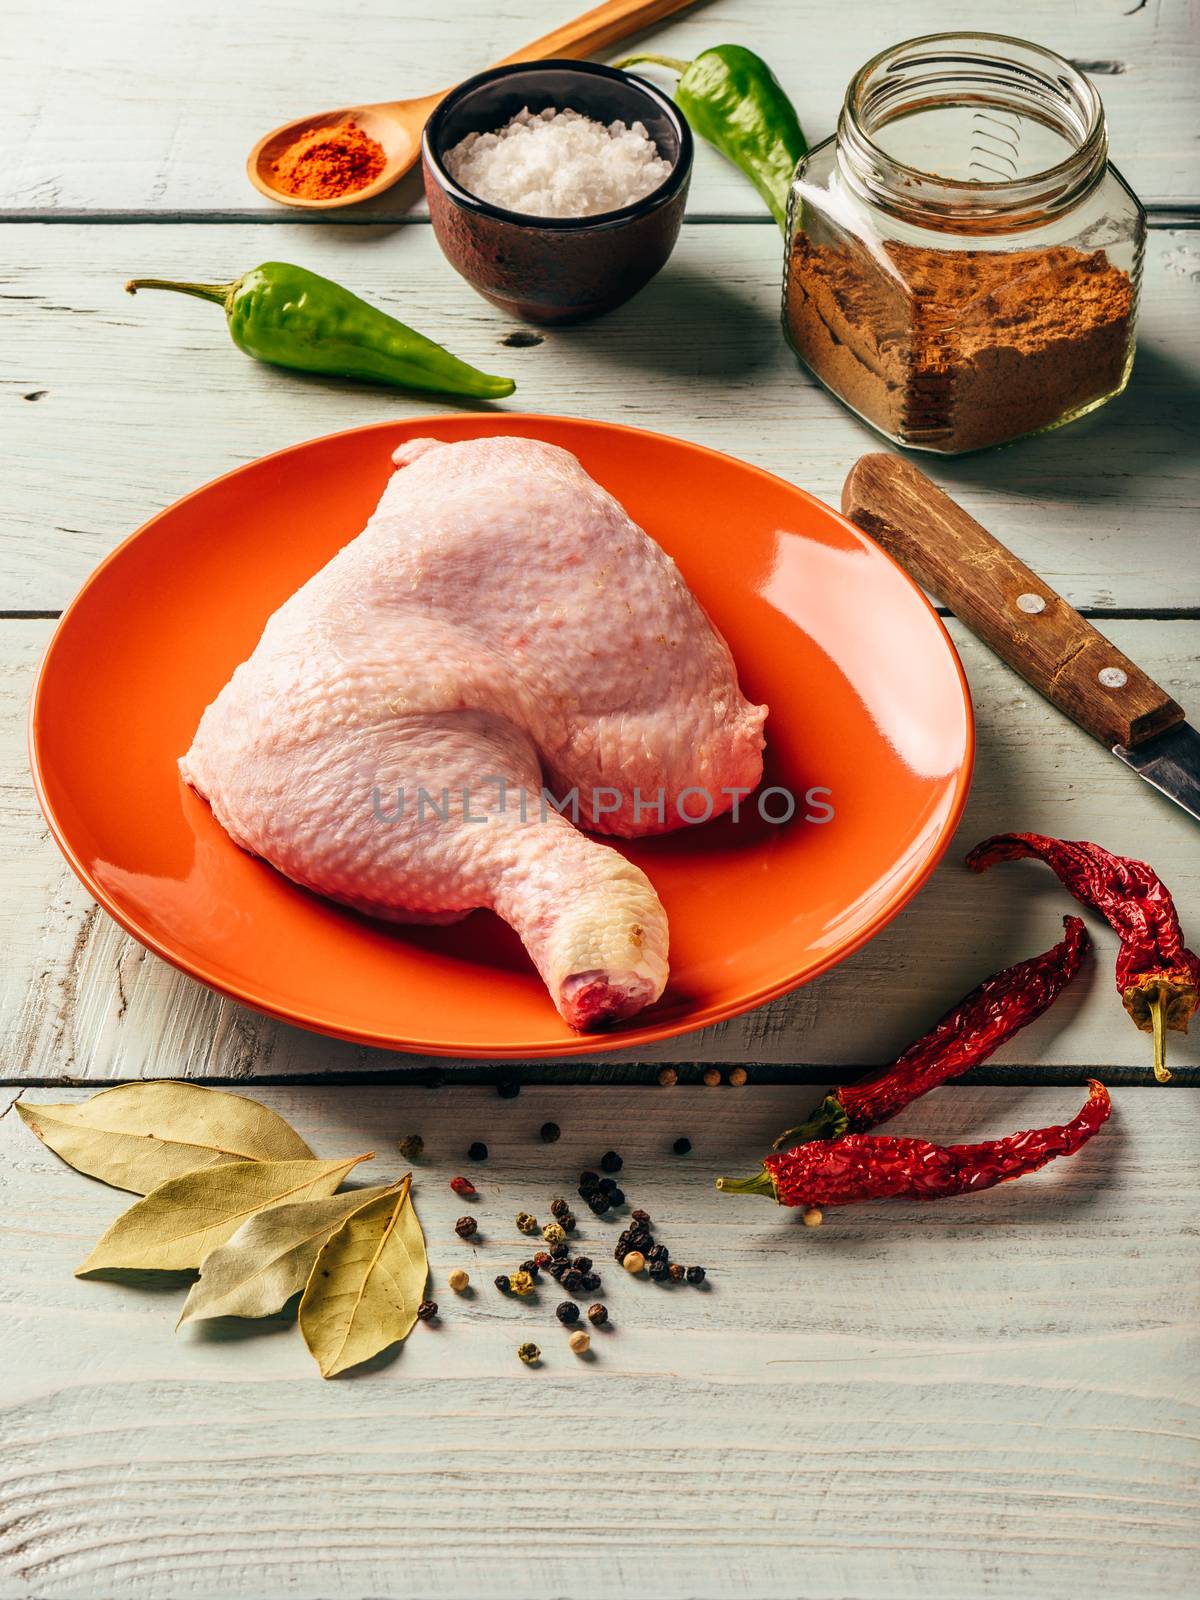 Chicken leg quarter on orange plate over wooden surface with different spices